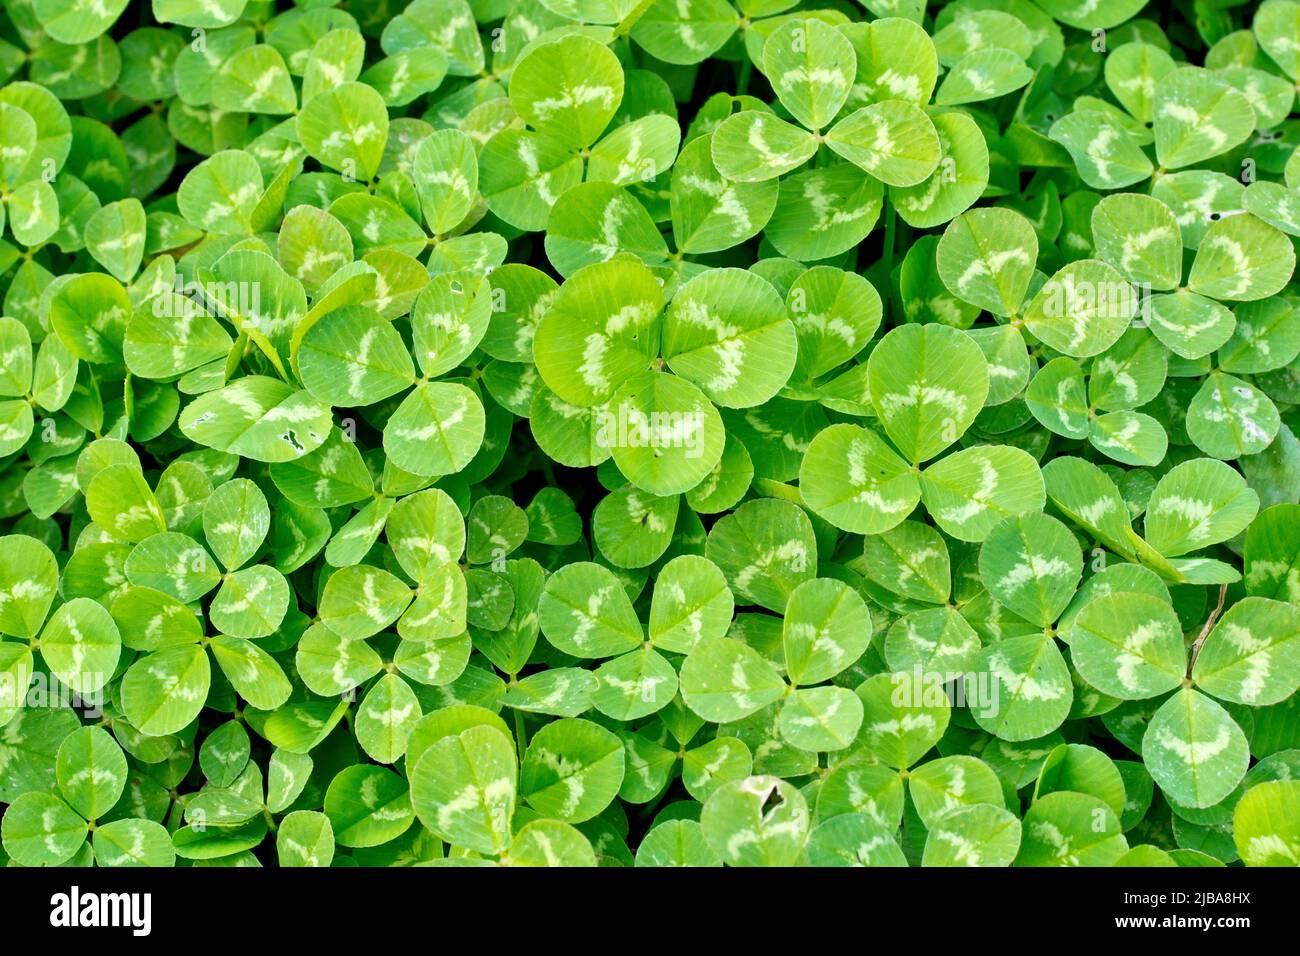 White Clover or Dutch Clover (trifolium repens), close up of a dense patch of the plant's three lobed, rounded leaves and the pale band on each. Stock Photo